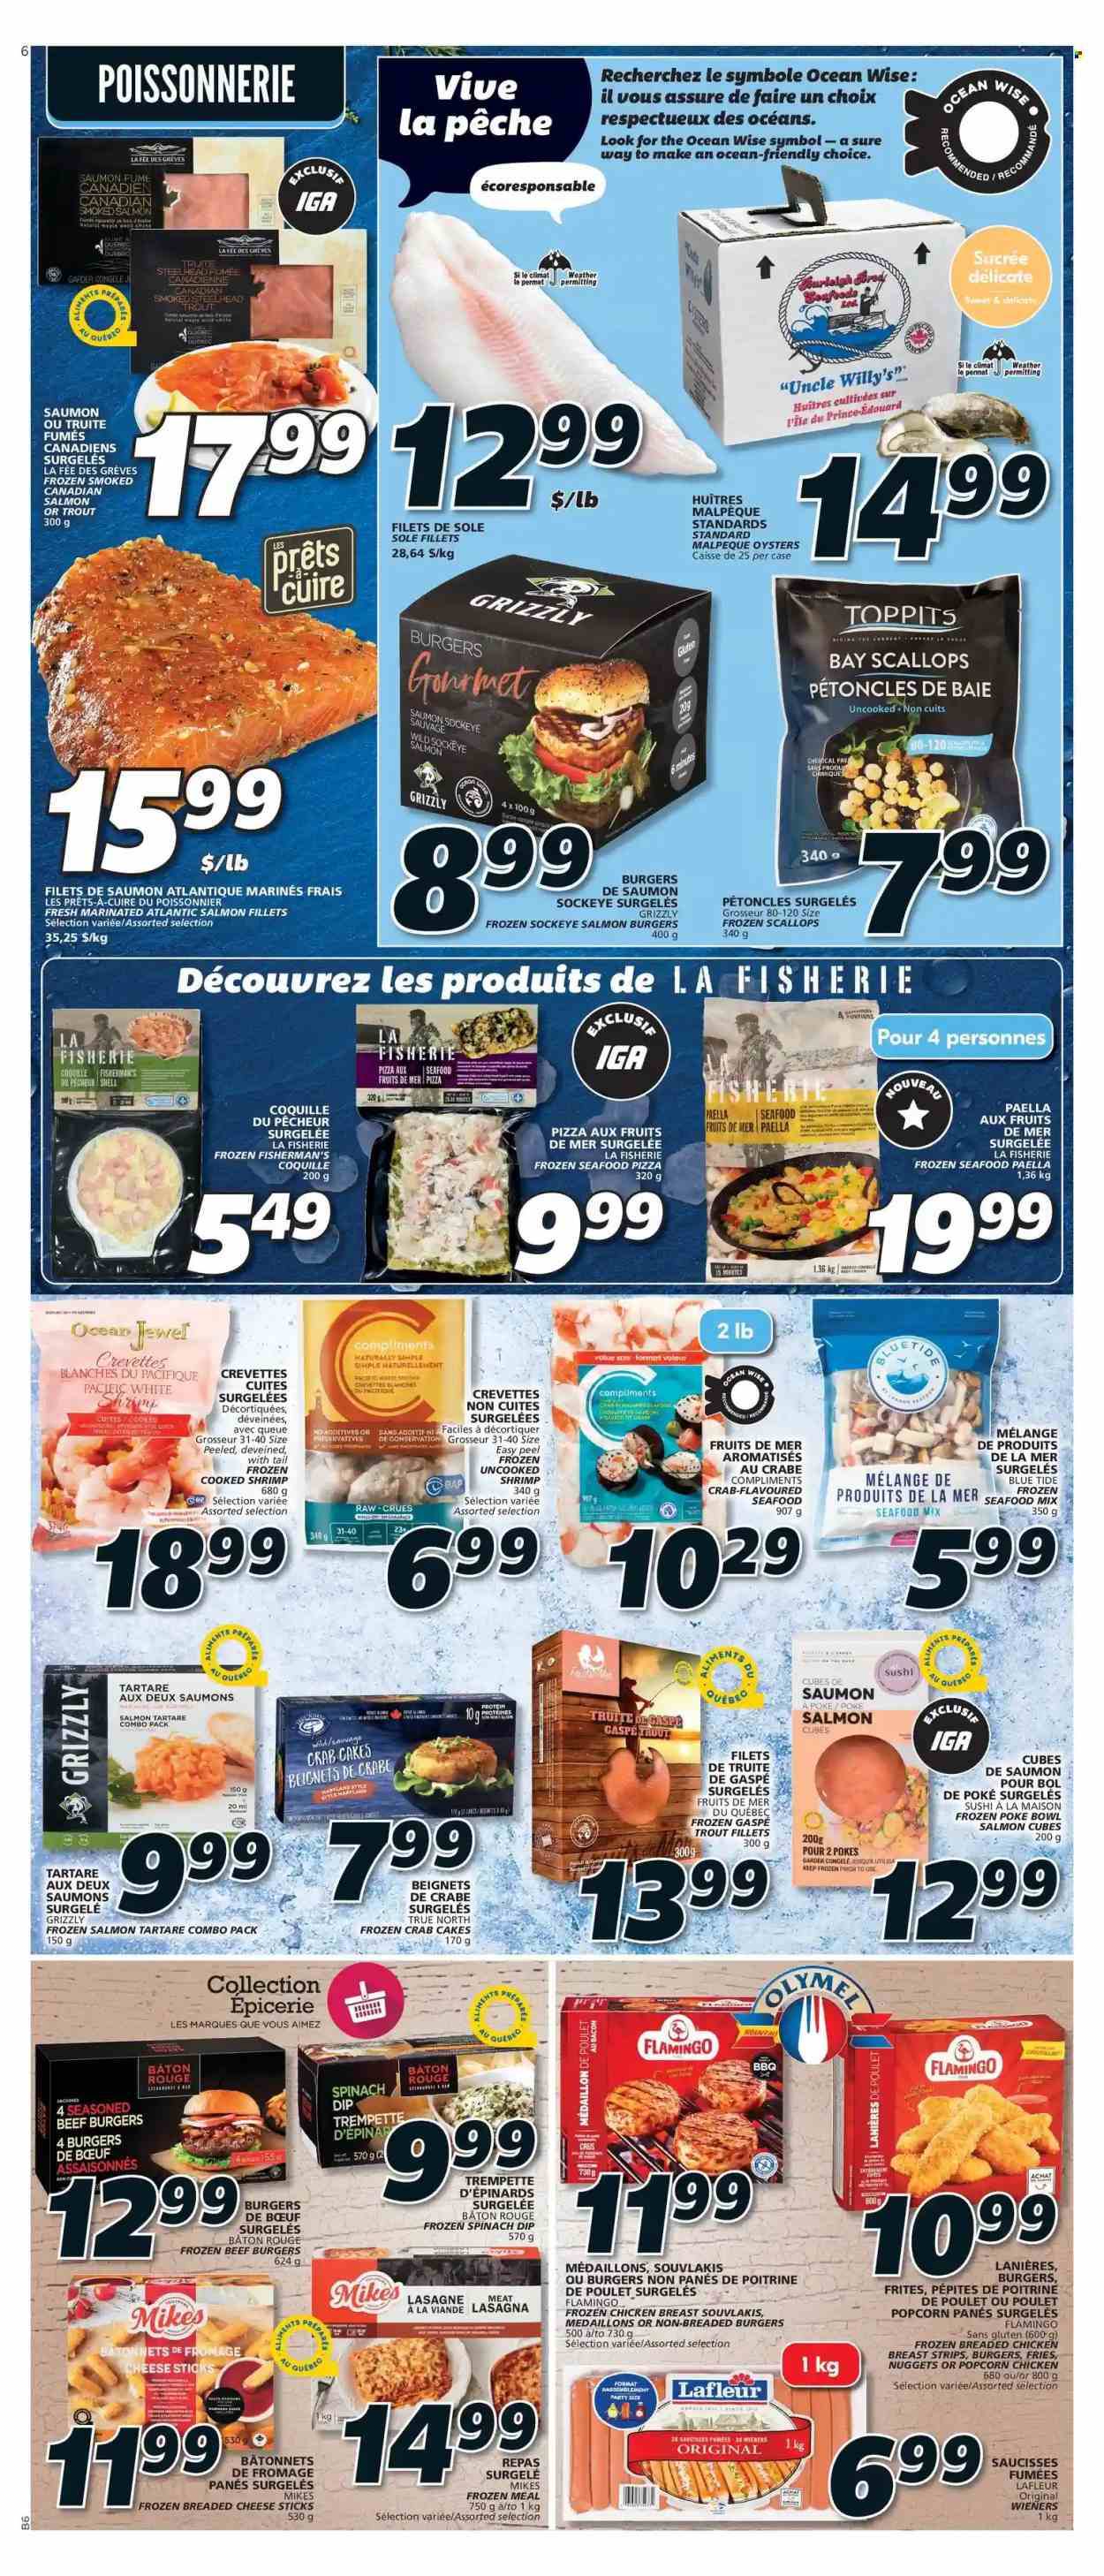 thumbnail - IGA Flyer - June 30, 2022 - July 06, 2022 - Sales products - salmon, salmon fillet, scallops, smoked salmon, trout, oysters, seafood, shrimps, crab cake, pizza, nuggets, hamburger, fried chicken, beef burger, lasagna meal, bacon, dip, spinach dip, strips, paella, cheese sticks, potato fries, popcorn, chicken. Page 5.